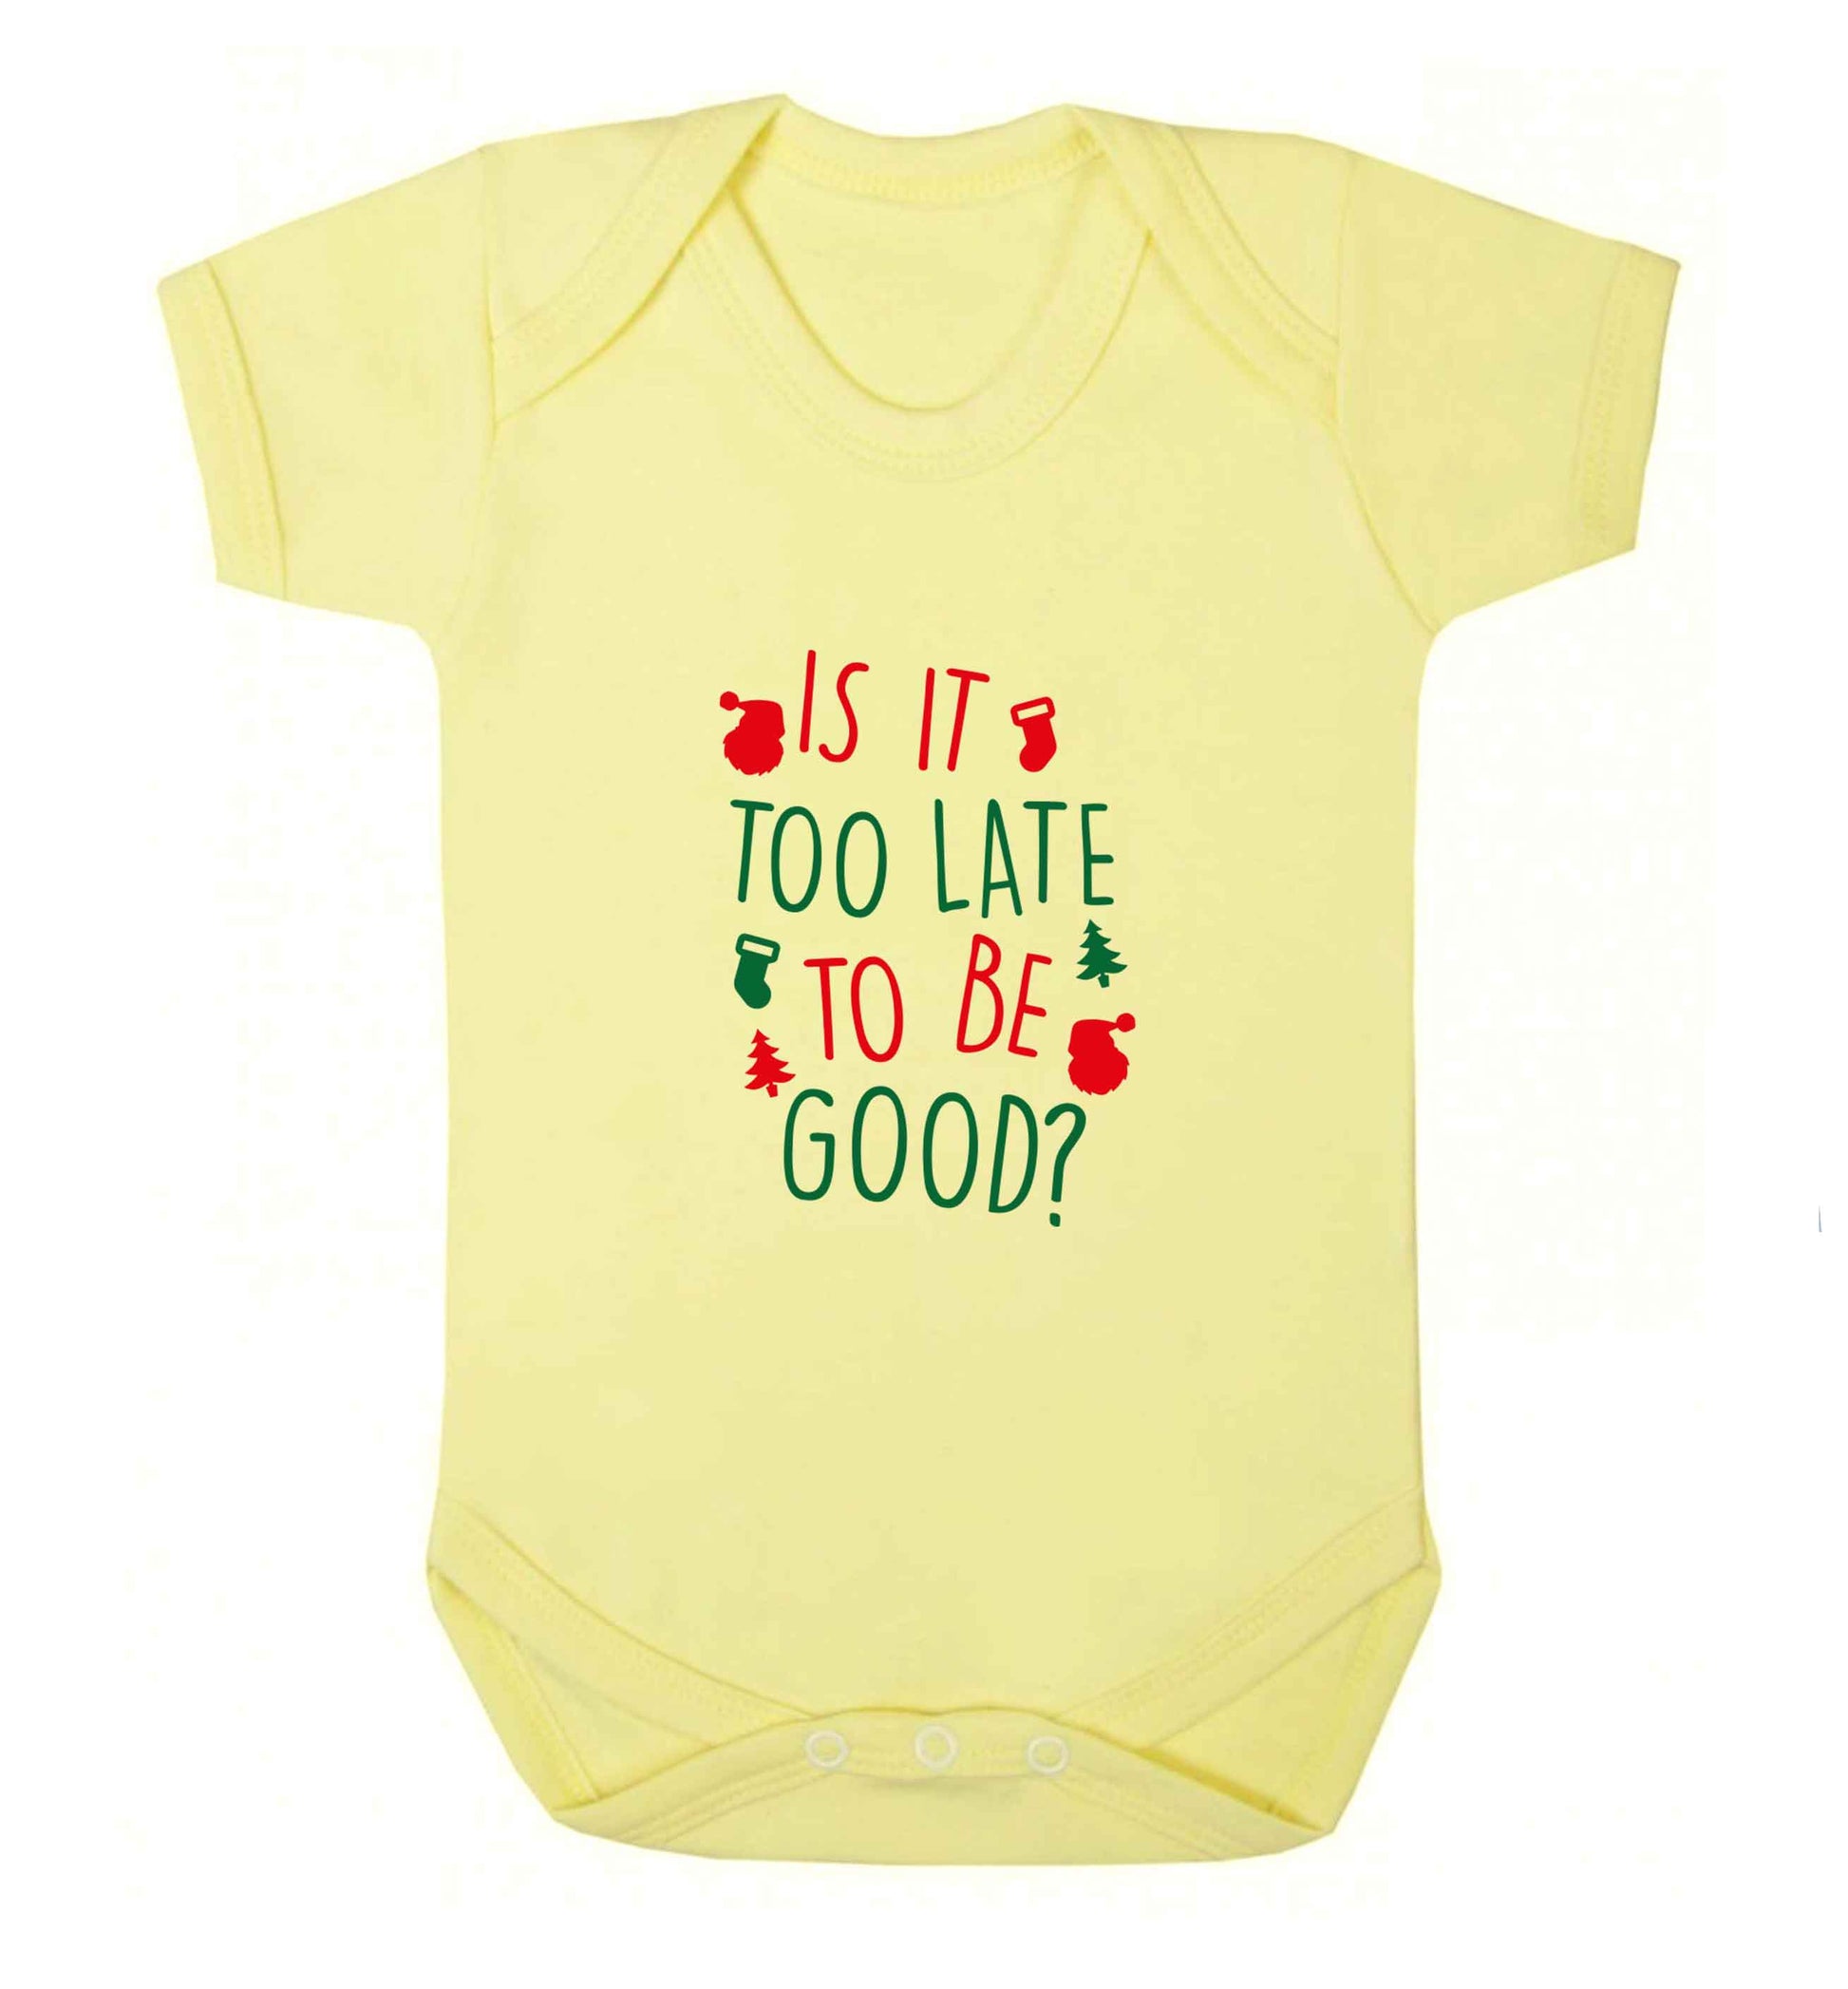 Too Late to be Good baby vest pale yellow 18-24 months